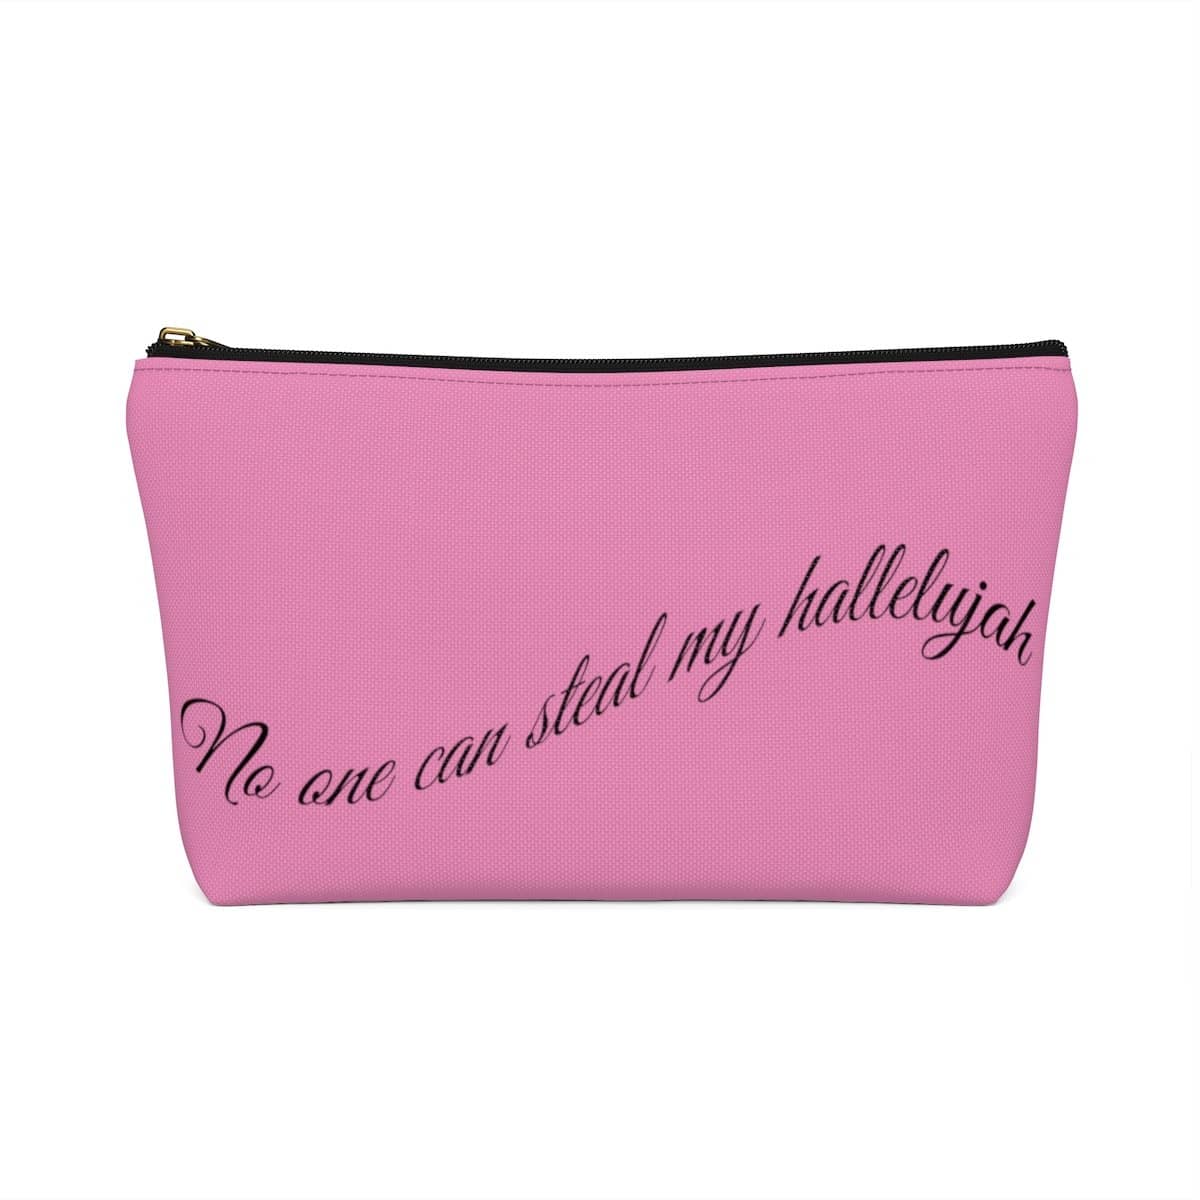 Accessory Pouch w T-bottom "No One Can Steal My Hallelujah" in 2 Sizes (3958407495774)